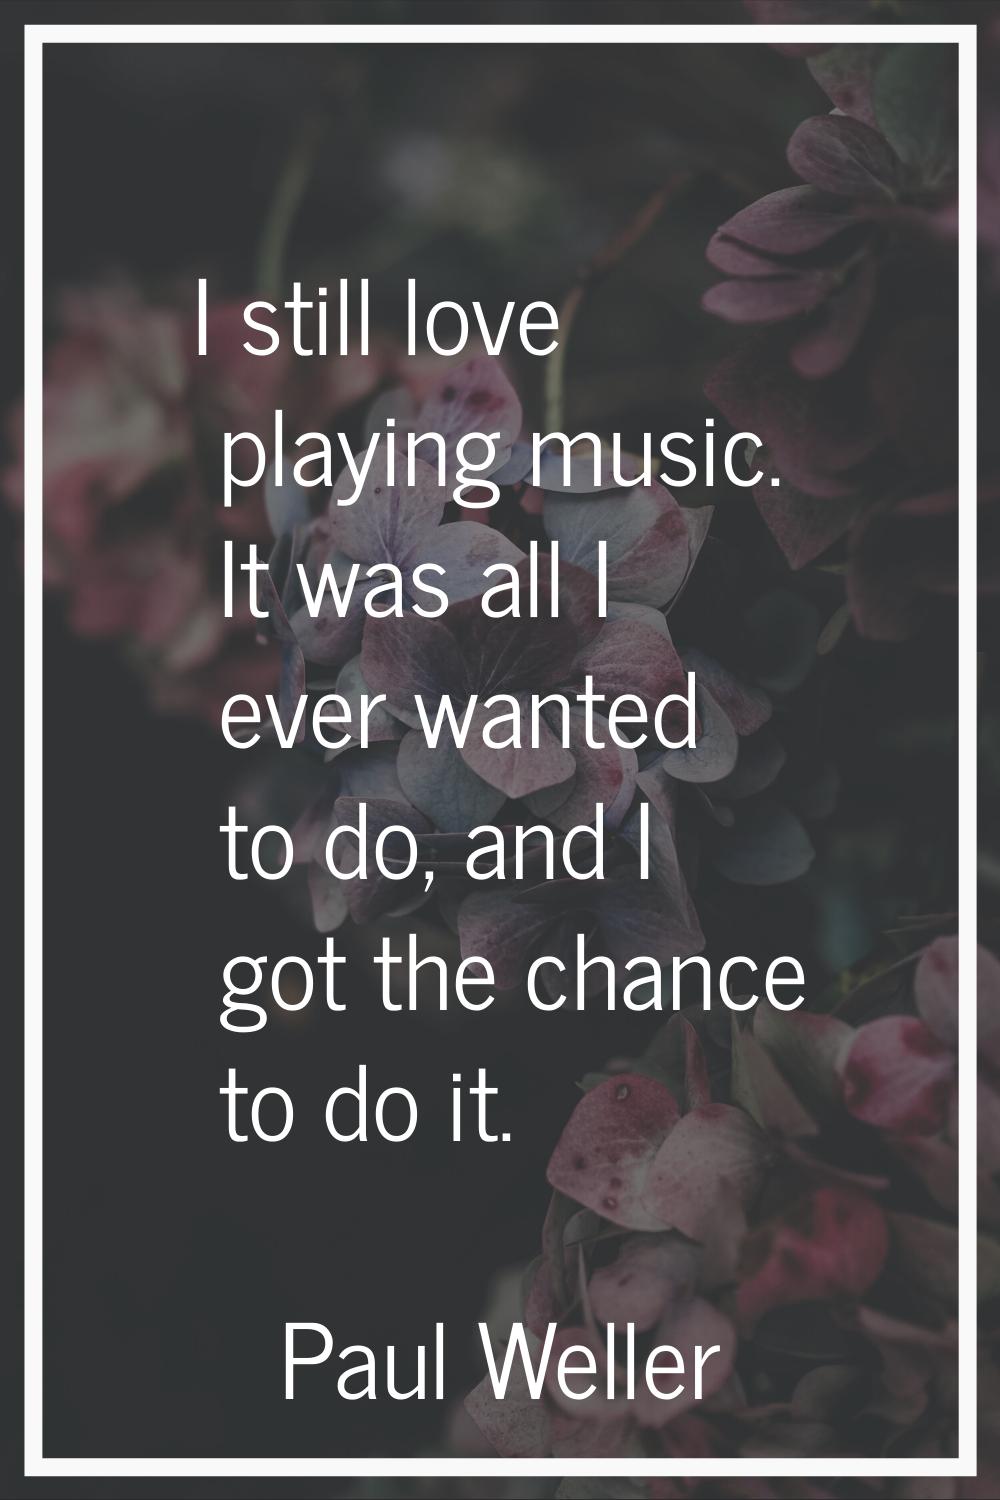 I still love playing music. It was all I ever wanted to do, and I got the chance to do it.